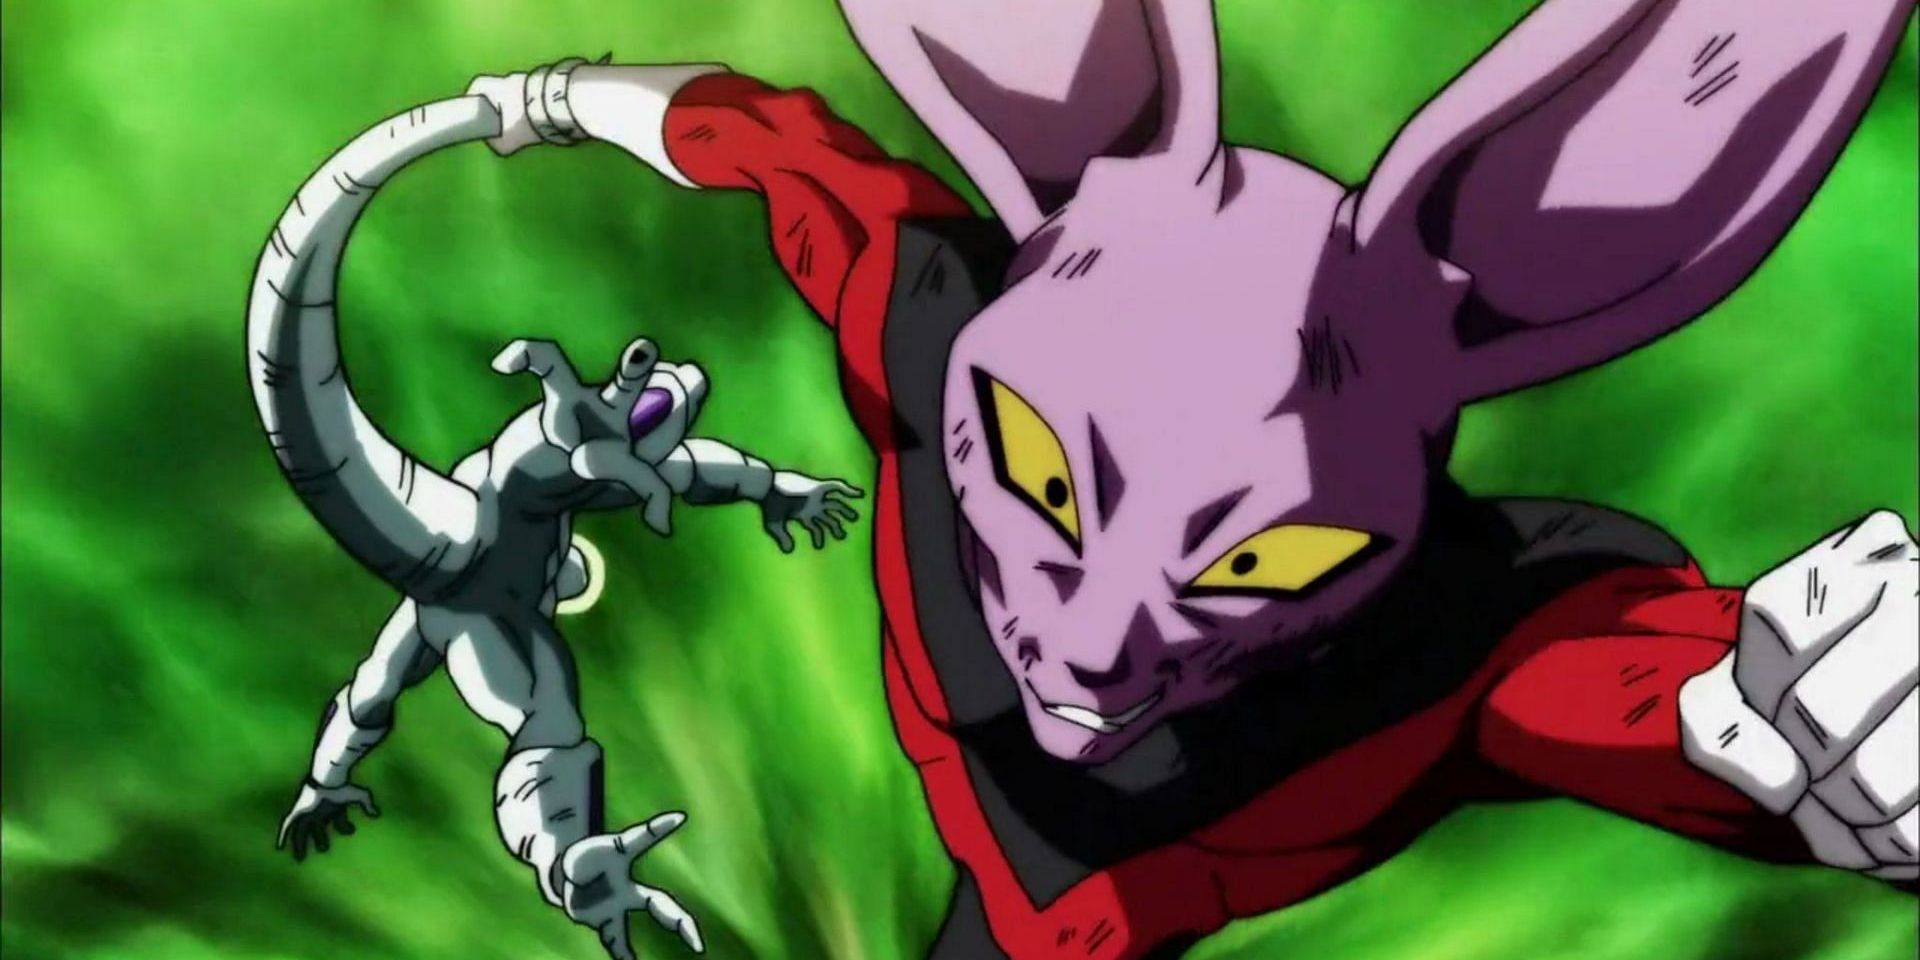 Dyspo dragging Frieza by his tail in Dragon Ball Super